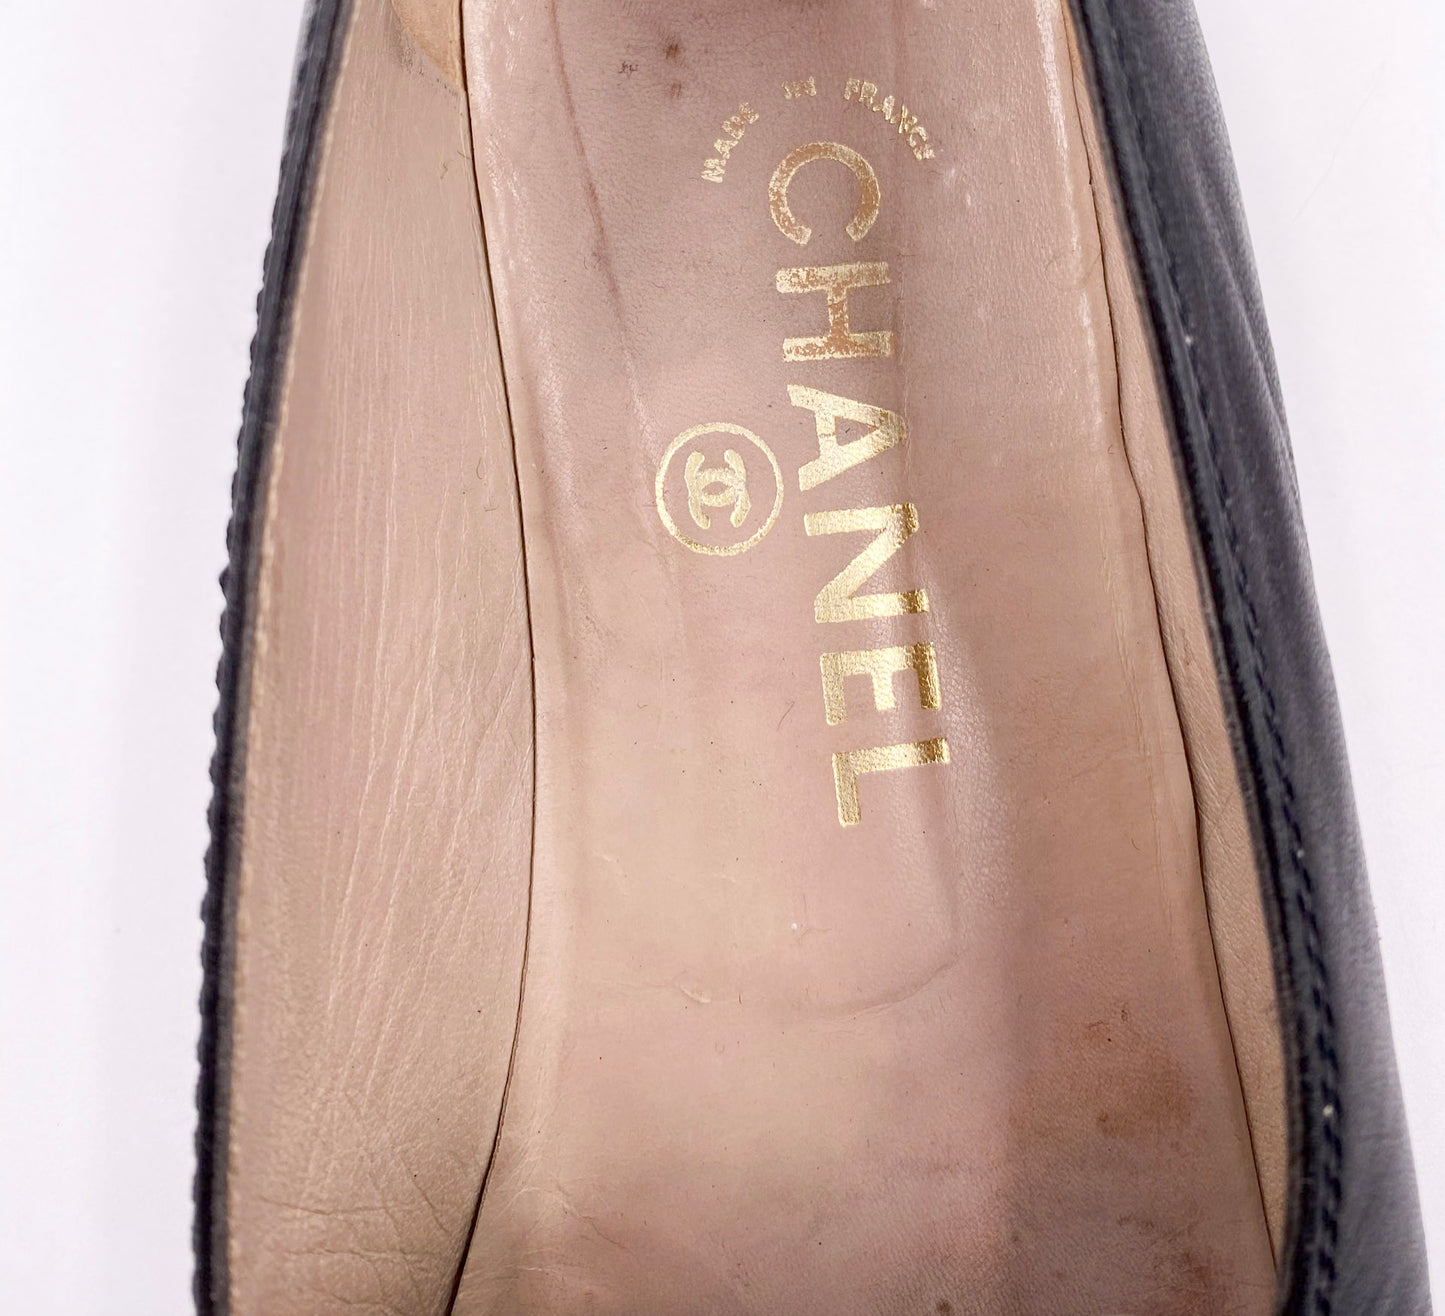 Chanel Black/White Loafers with Gold Emblem